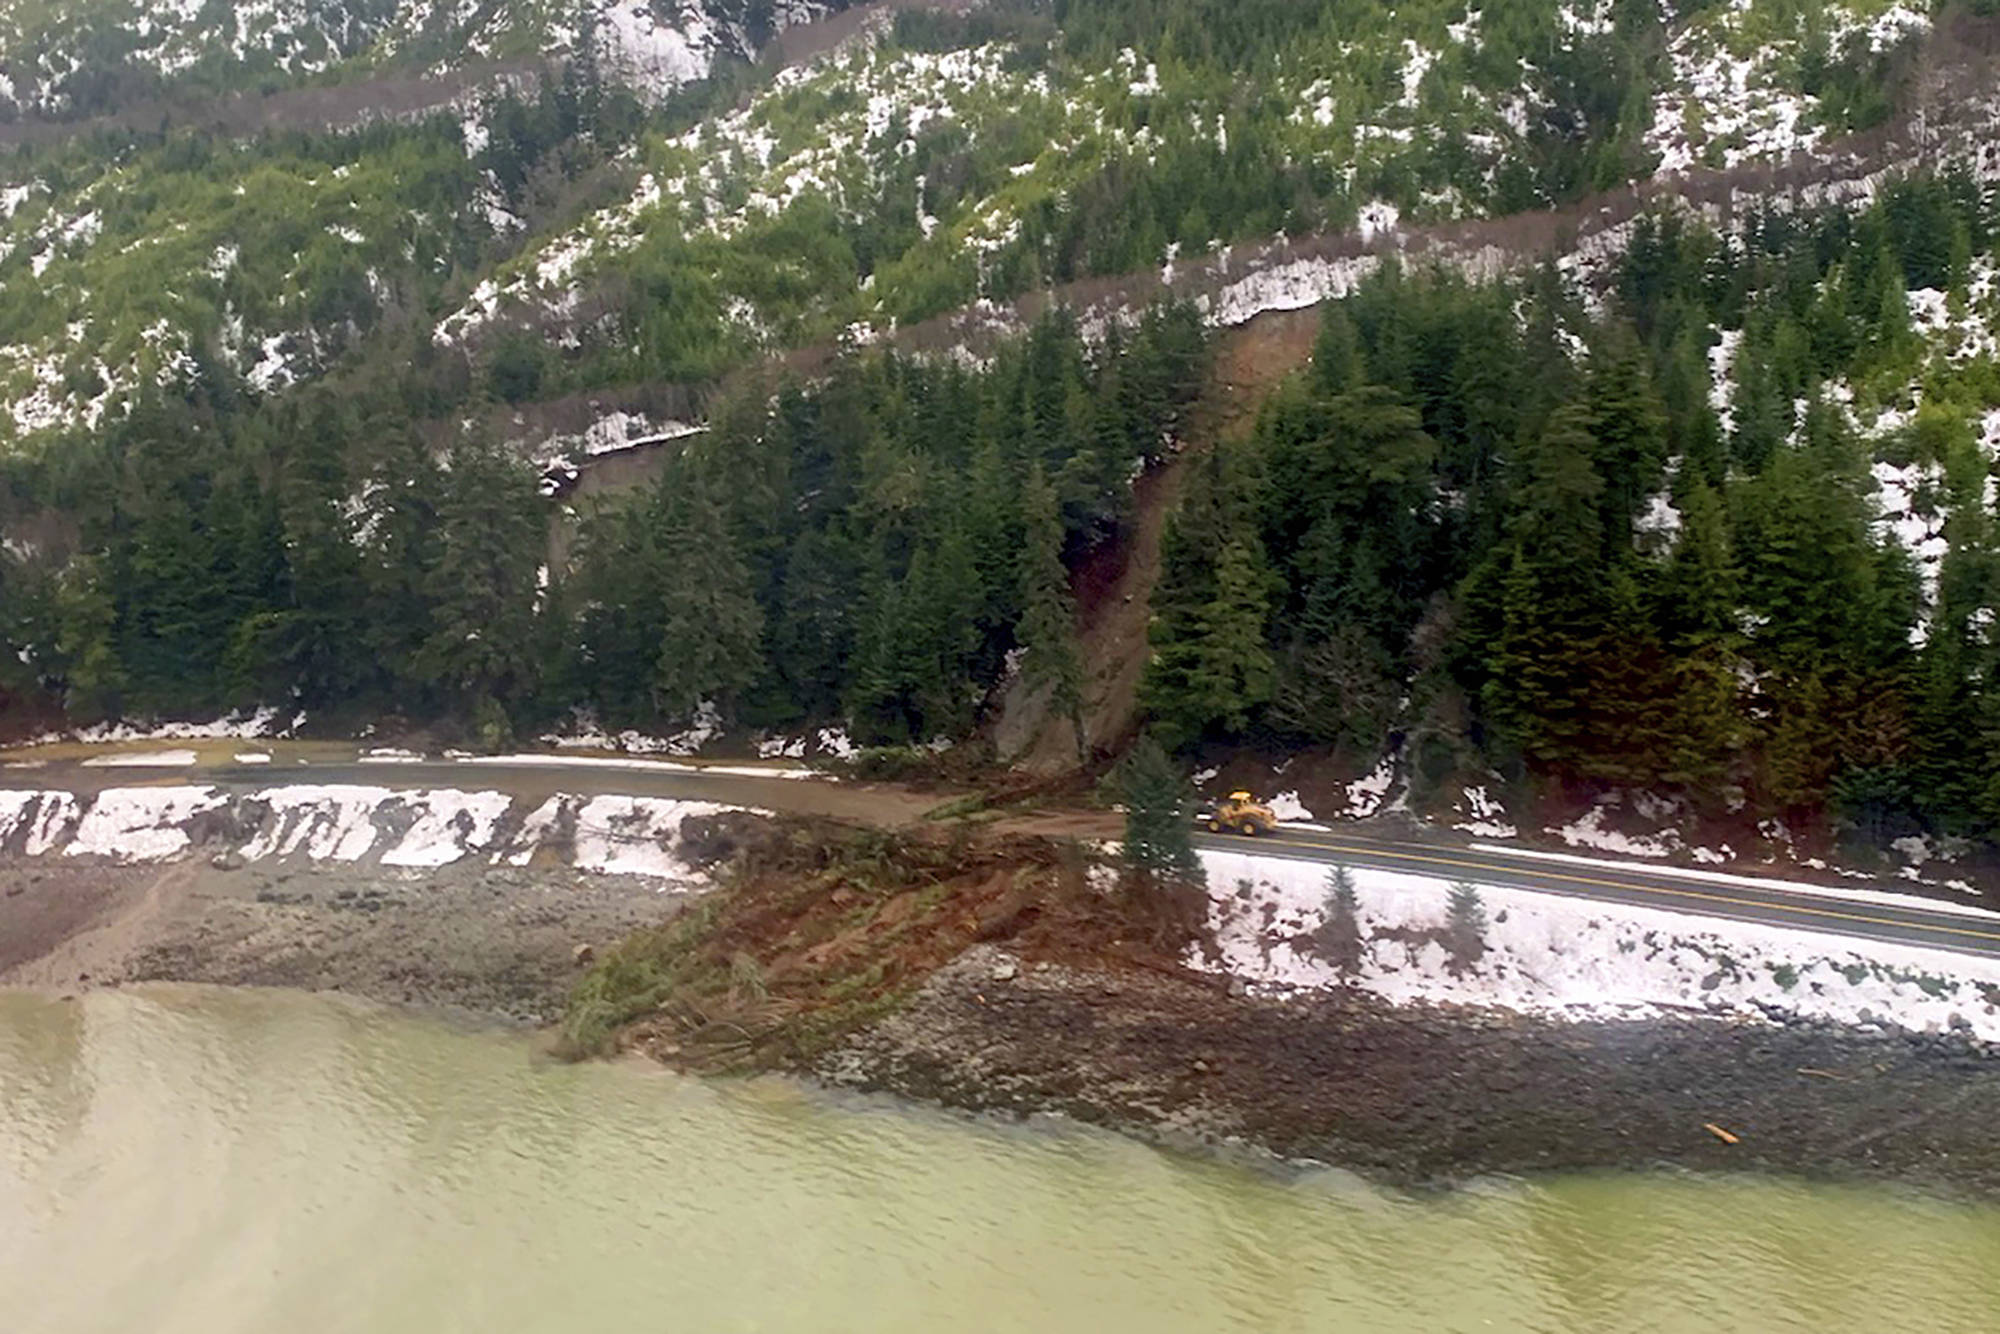 This photo from the U.S. Coast Guard shows where a rainstorm caused landslides in Haines, Alaska, Thursday, Dec. 3, 2020. Authorities have identified the two people missing after a landslide the width of two football fields slammed into the southeast Alaska community. The Coast Guard remains engaged with the Alaska State Troopers and the city of Haines while responding to this event. (Lt. Erick Oredson / U.S. Coast Guard)